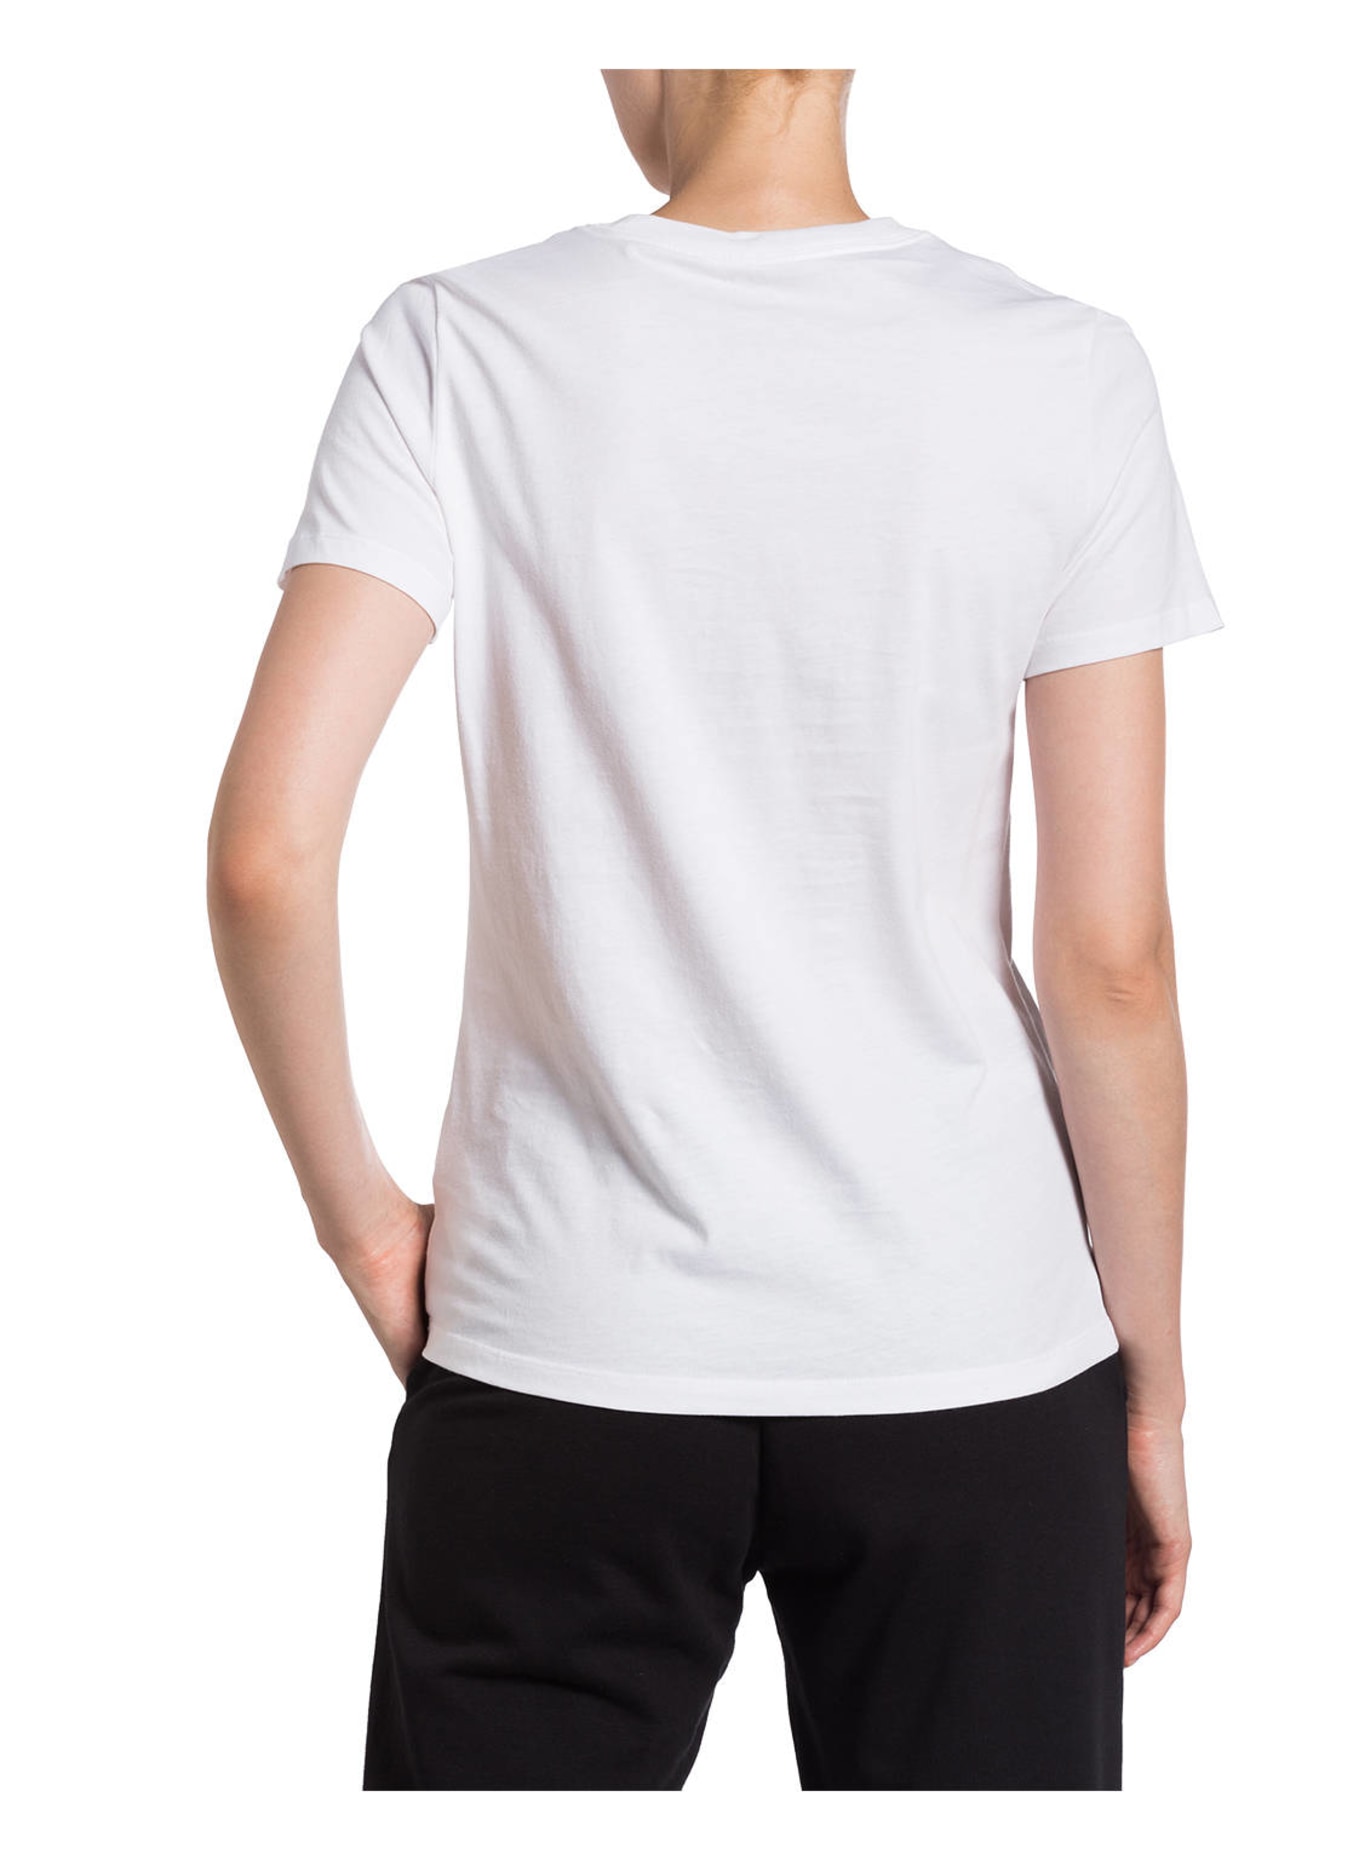 Nike T-shirt SPORTSWEAR ESSENTIAL, Color: WHITE (Image 3)